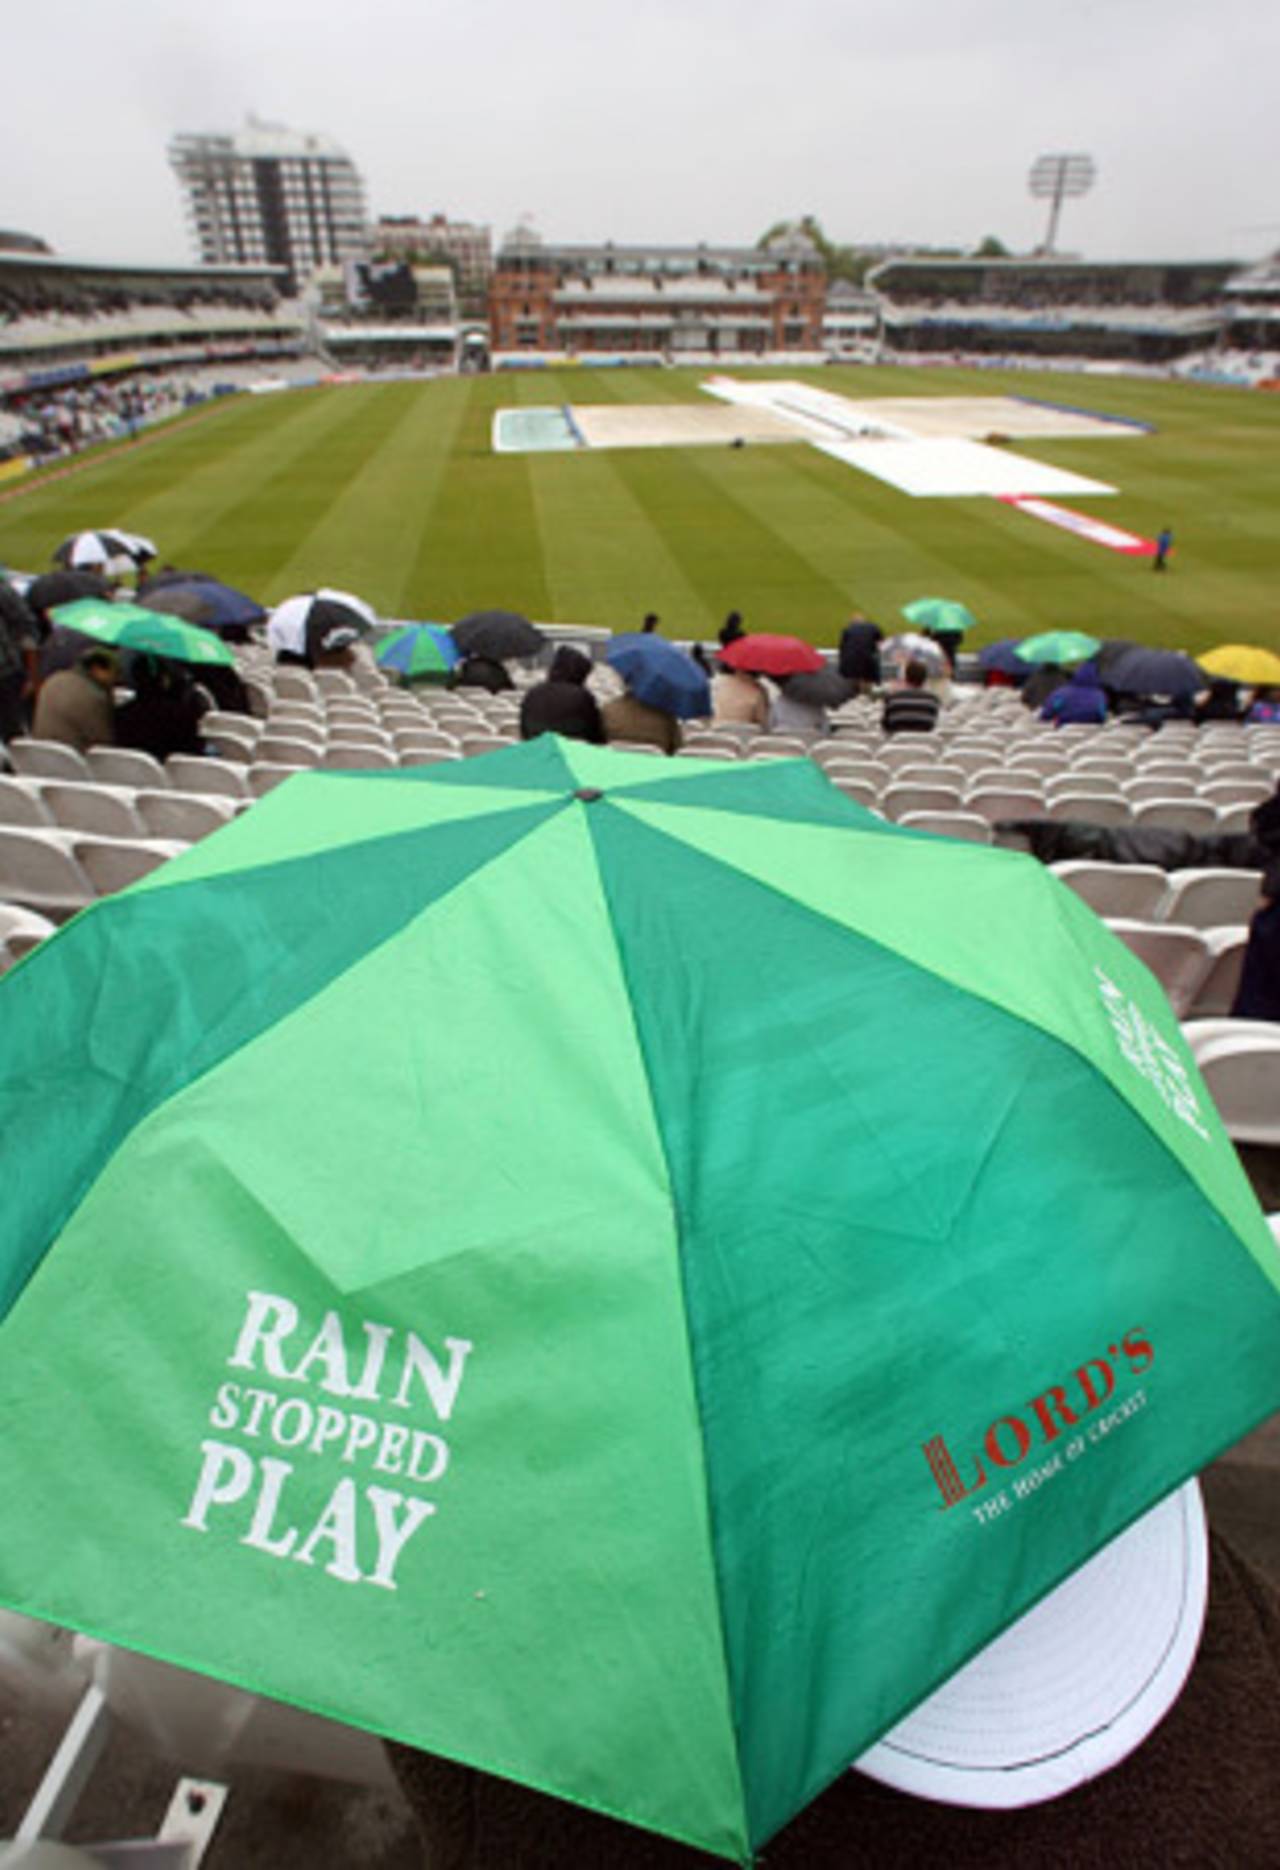 The umbrellas are out at Lord's, England v Bangladesh, 1st Test, Lord's, 3rd day, May 29, 2010